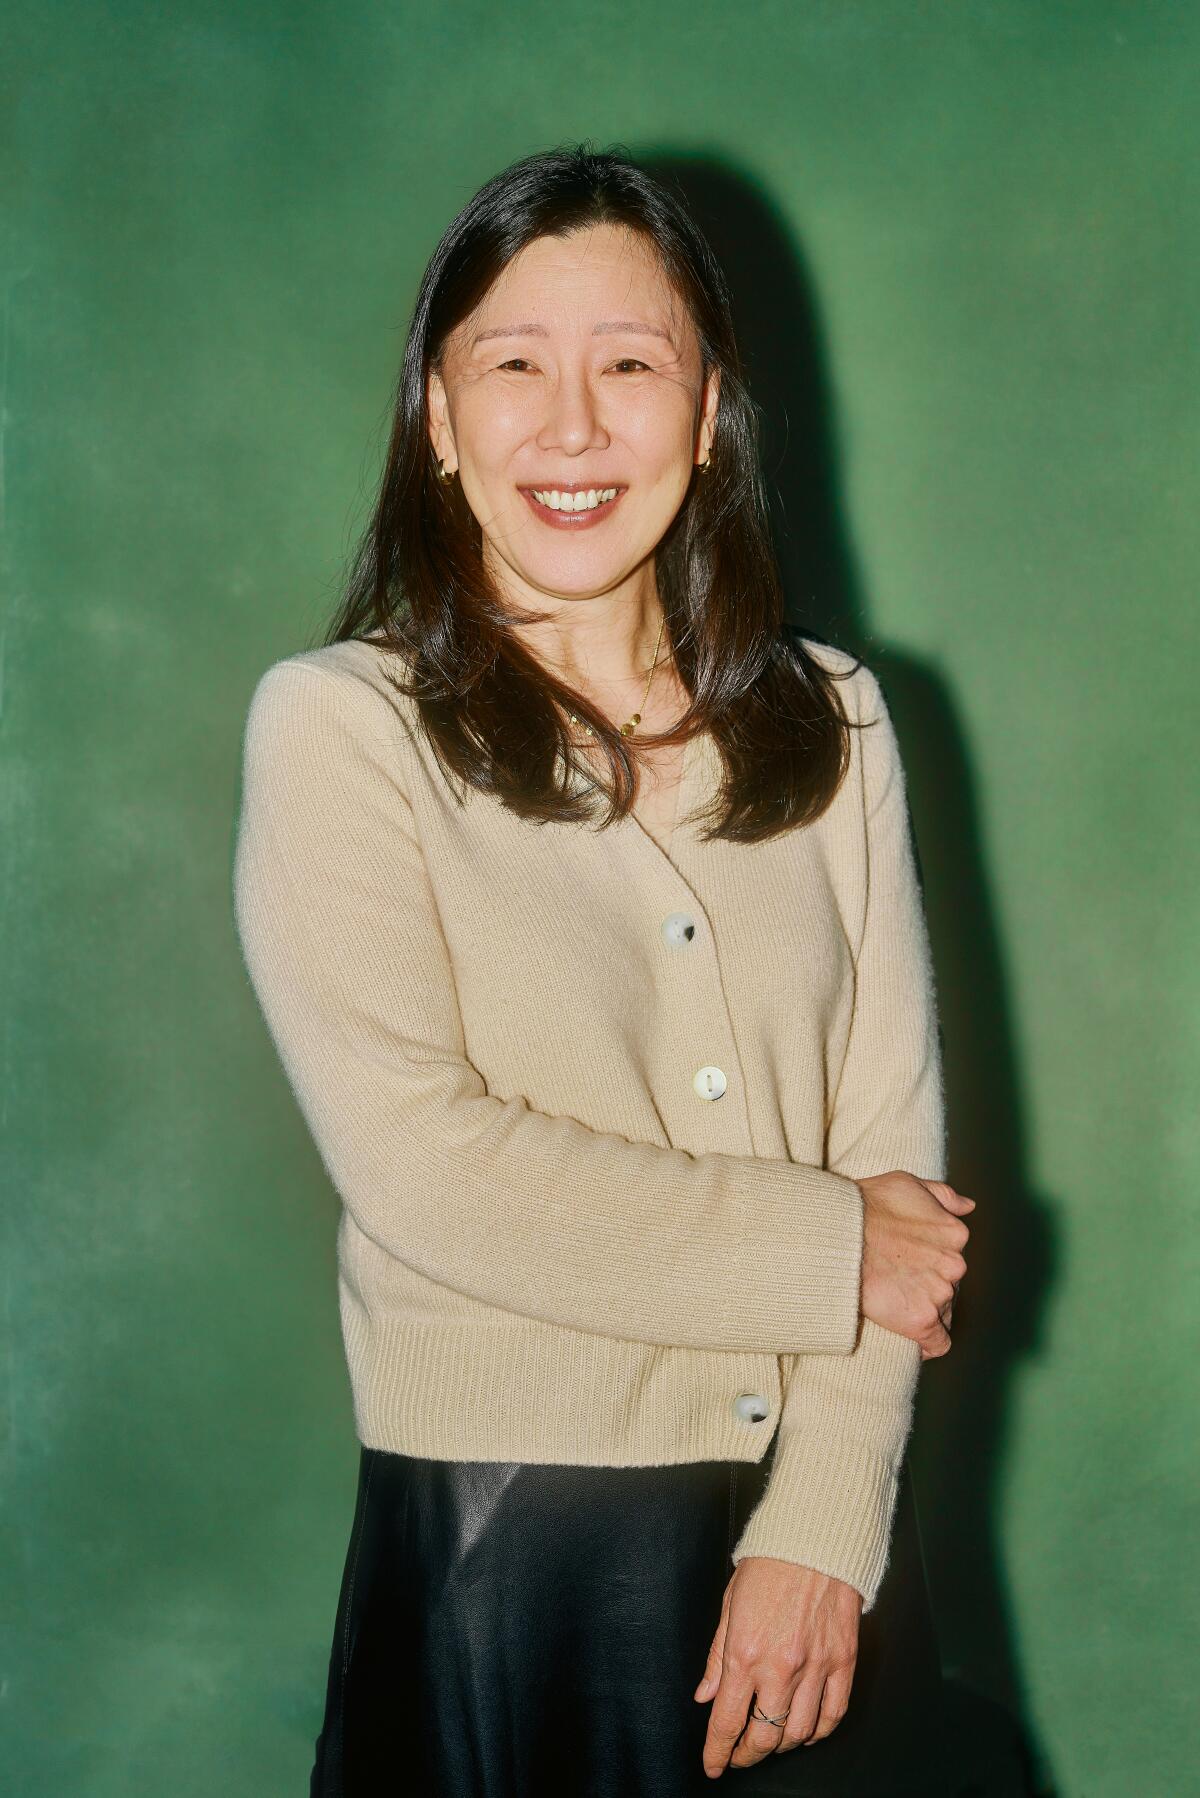 Eunice Kim, Netflix's Chief Product Officer